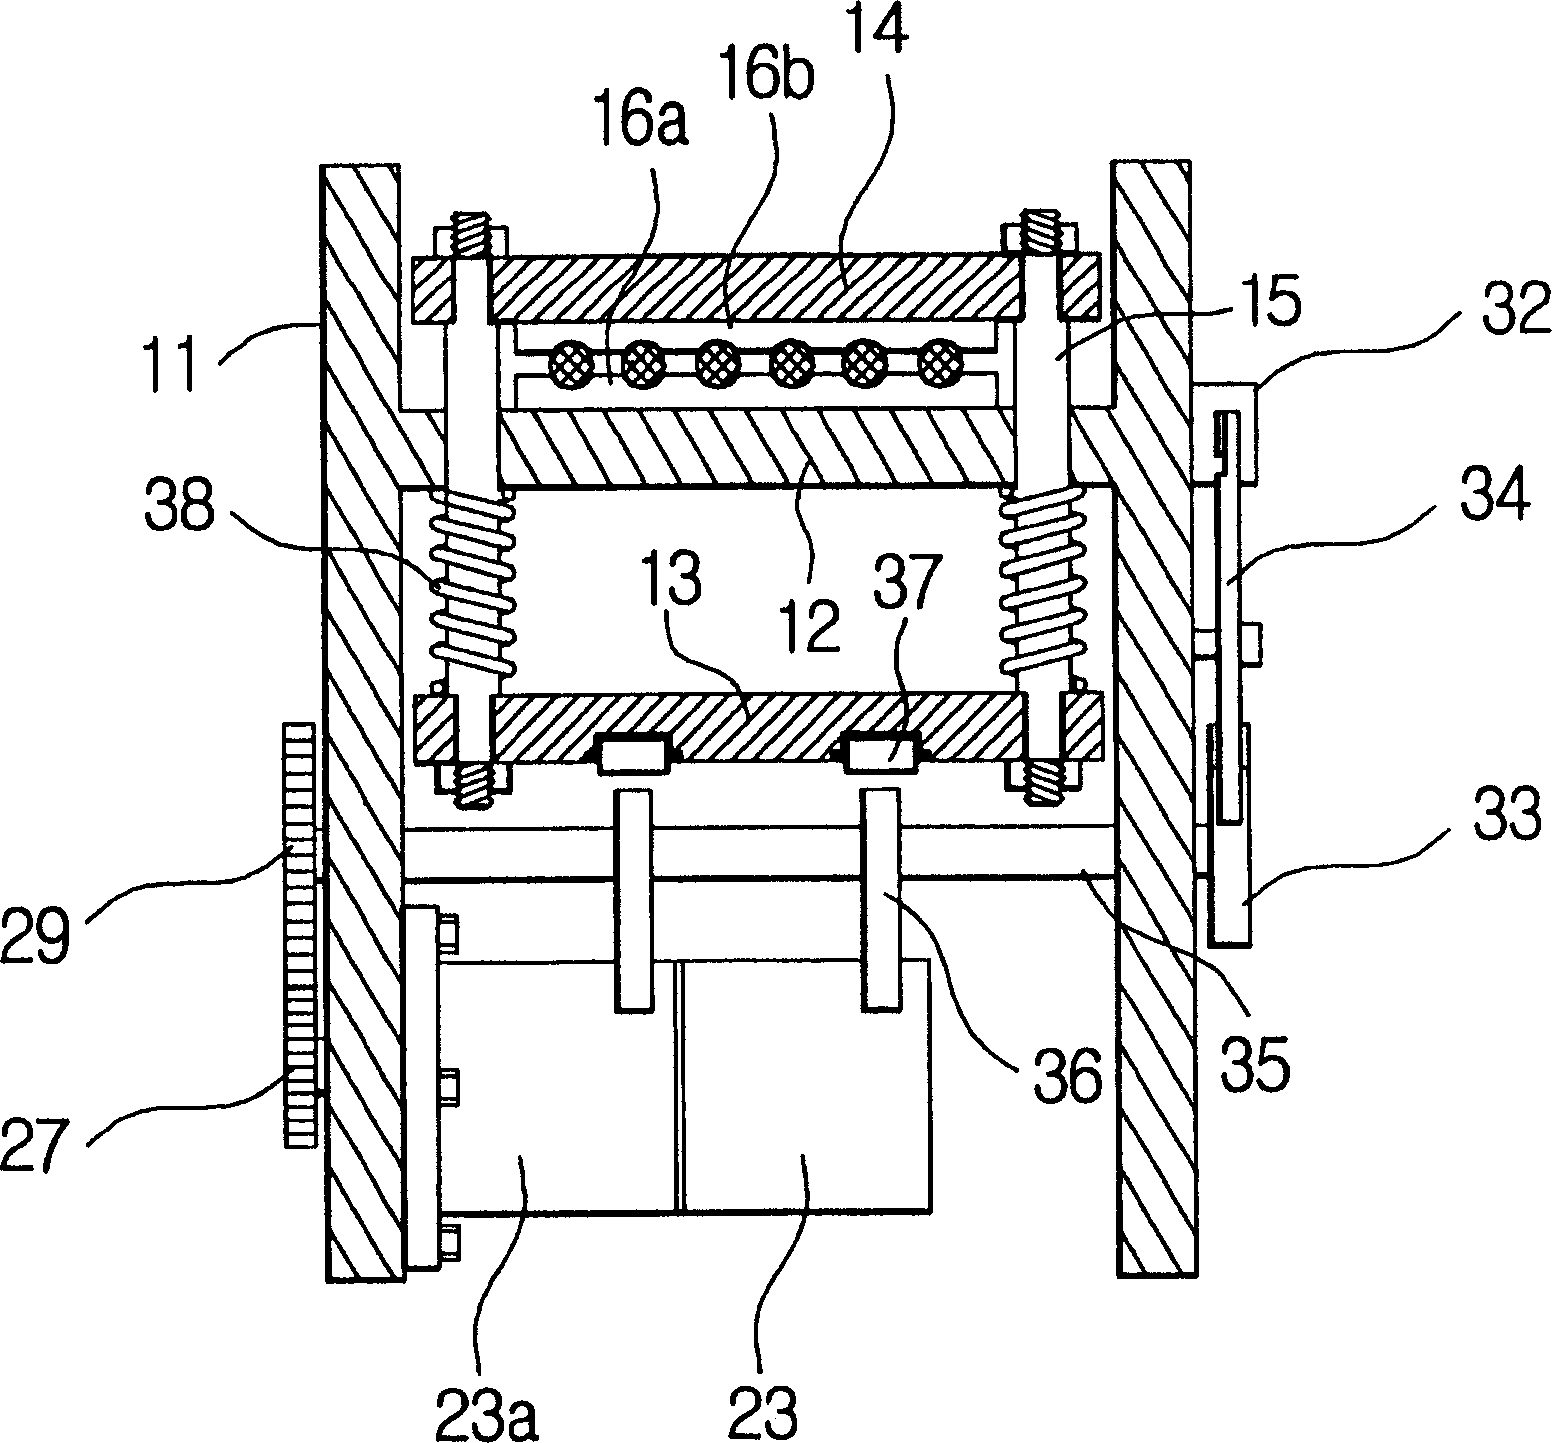 Rope brake system of elevator by using cam